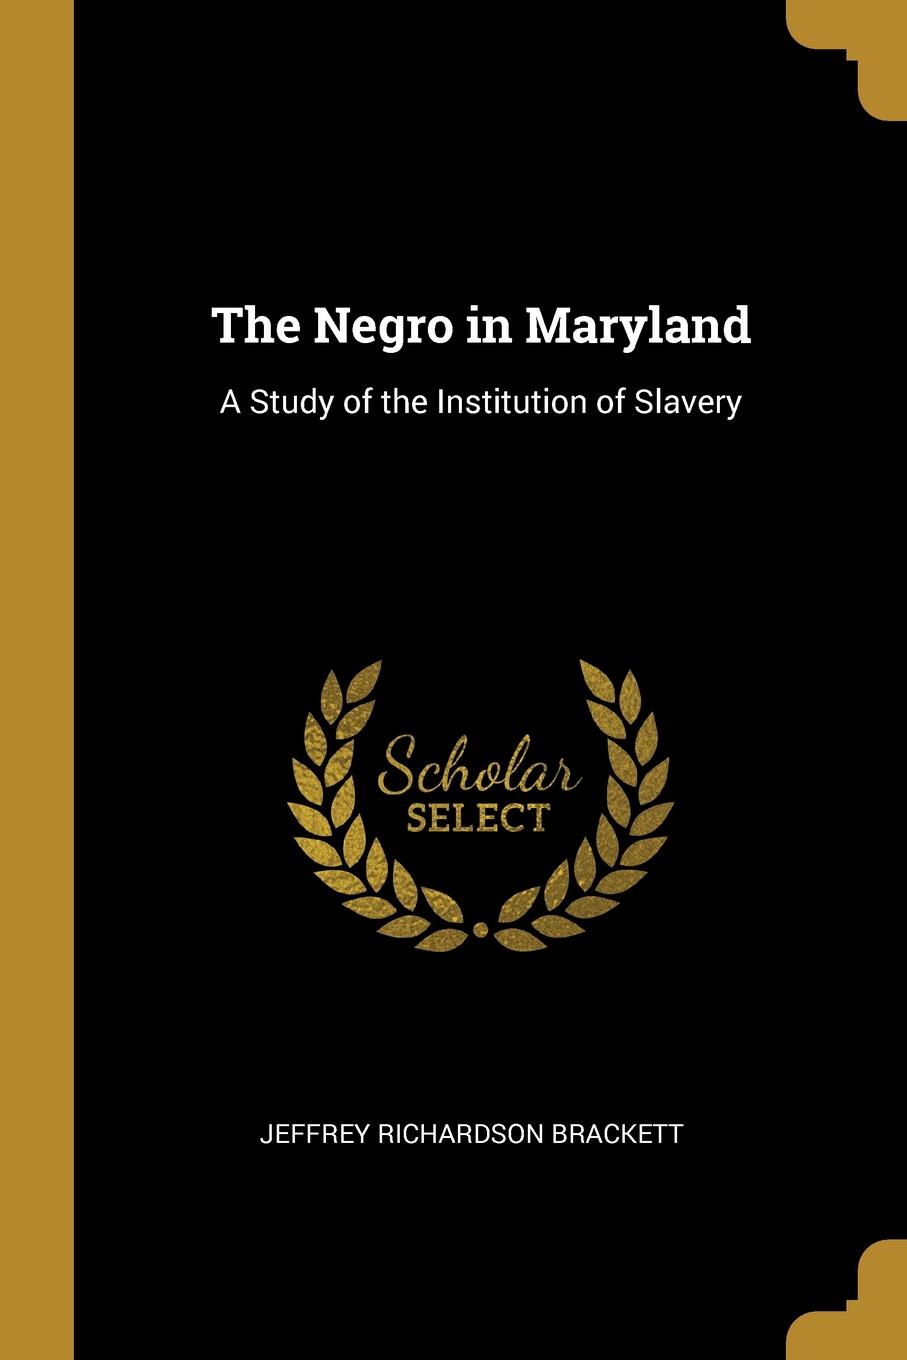 The Negro in Maryland. A Study of the Institution of Slavery